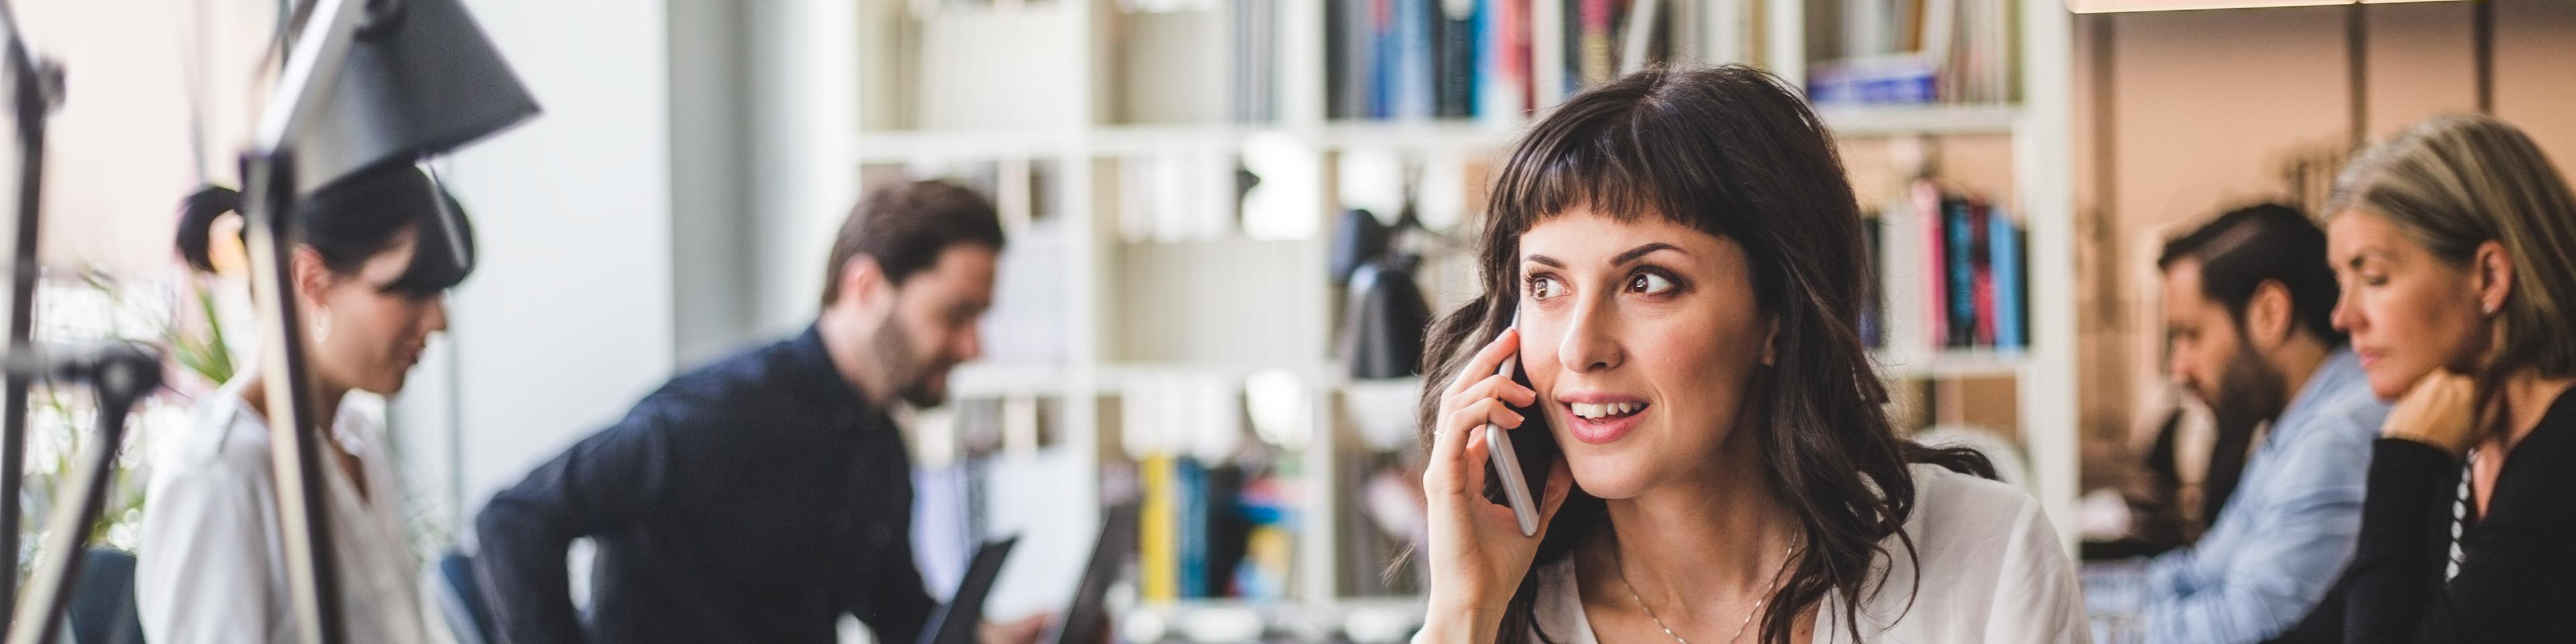 Businesswoman looking away while talking on mobile phone at desk in creative office